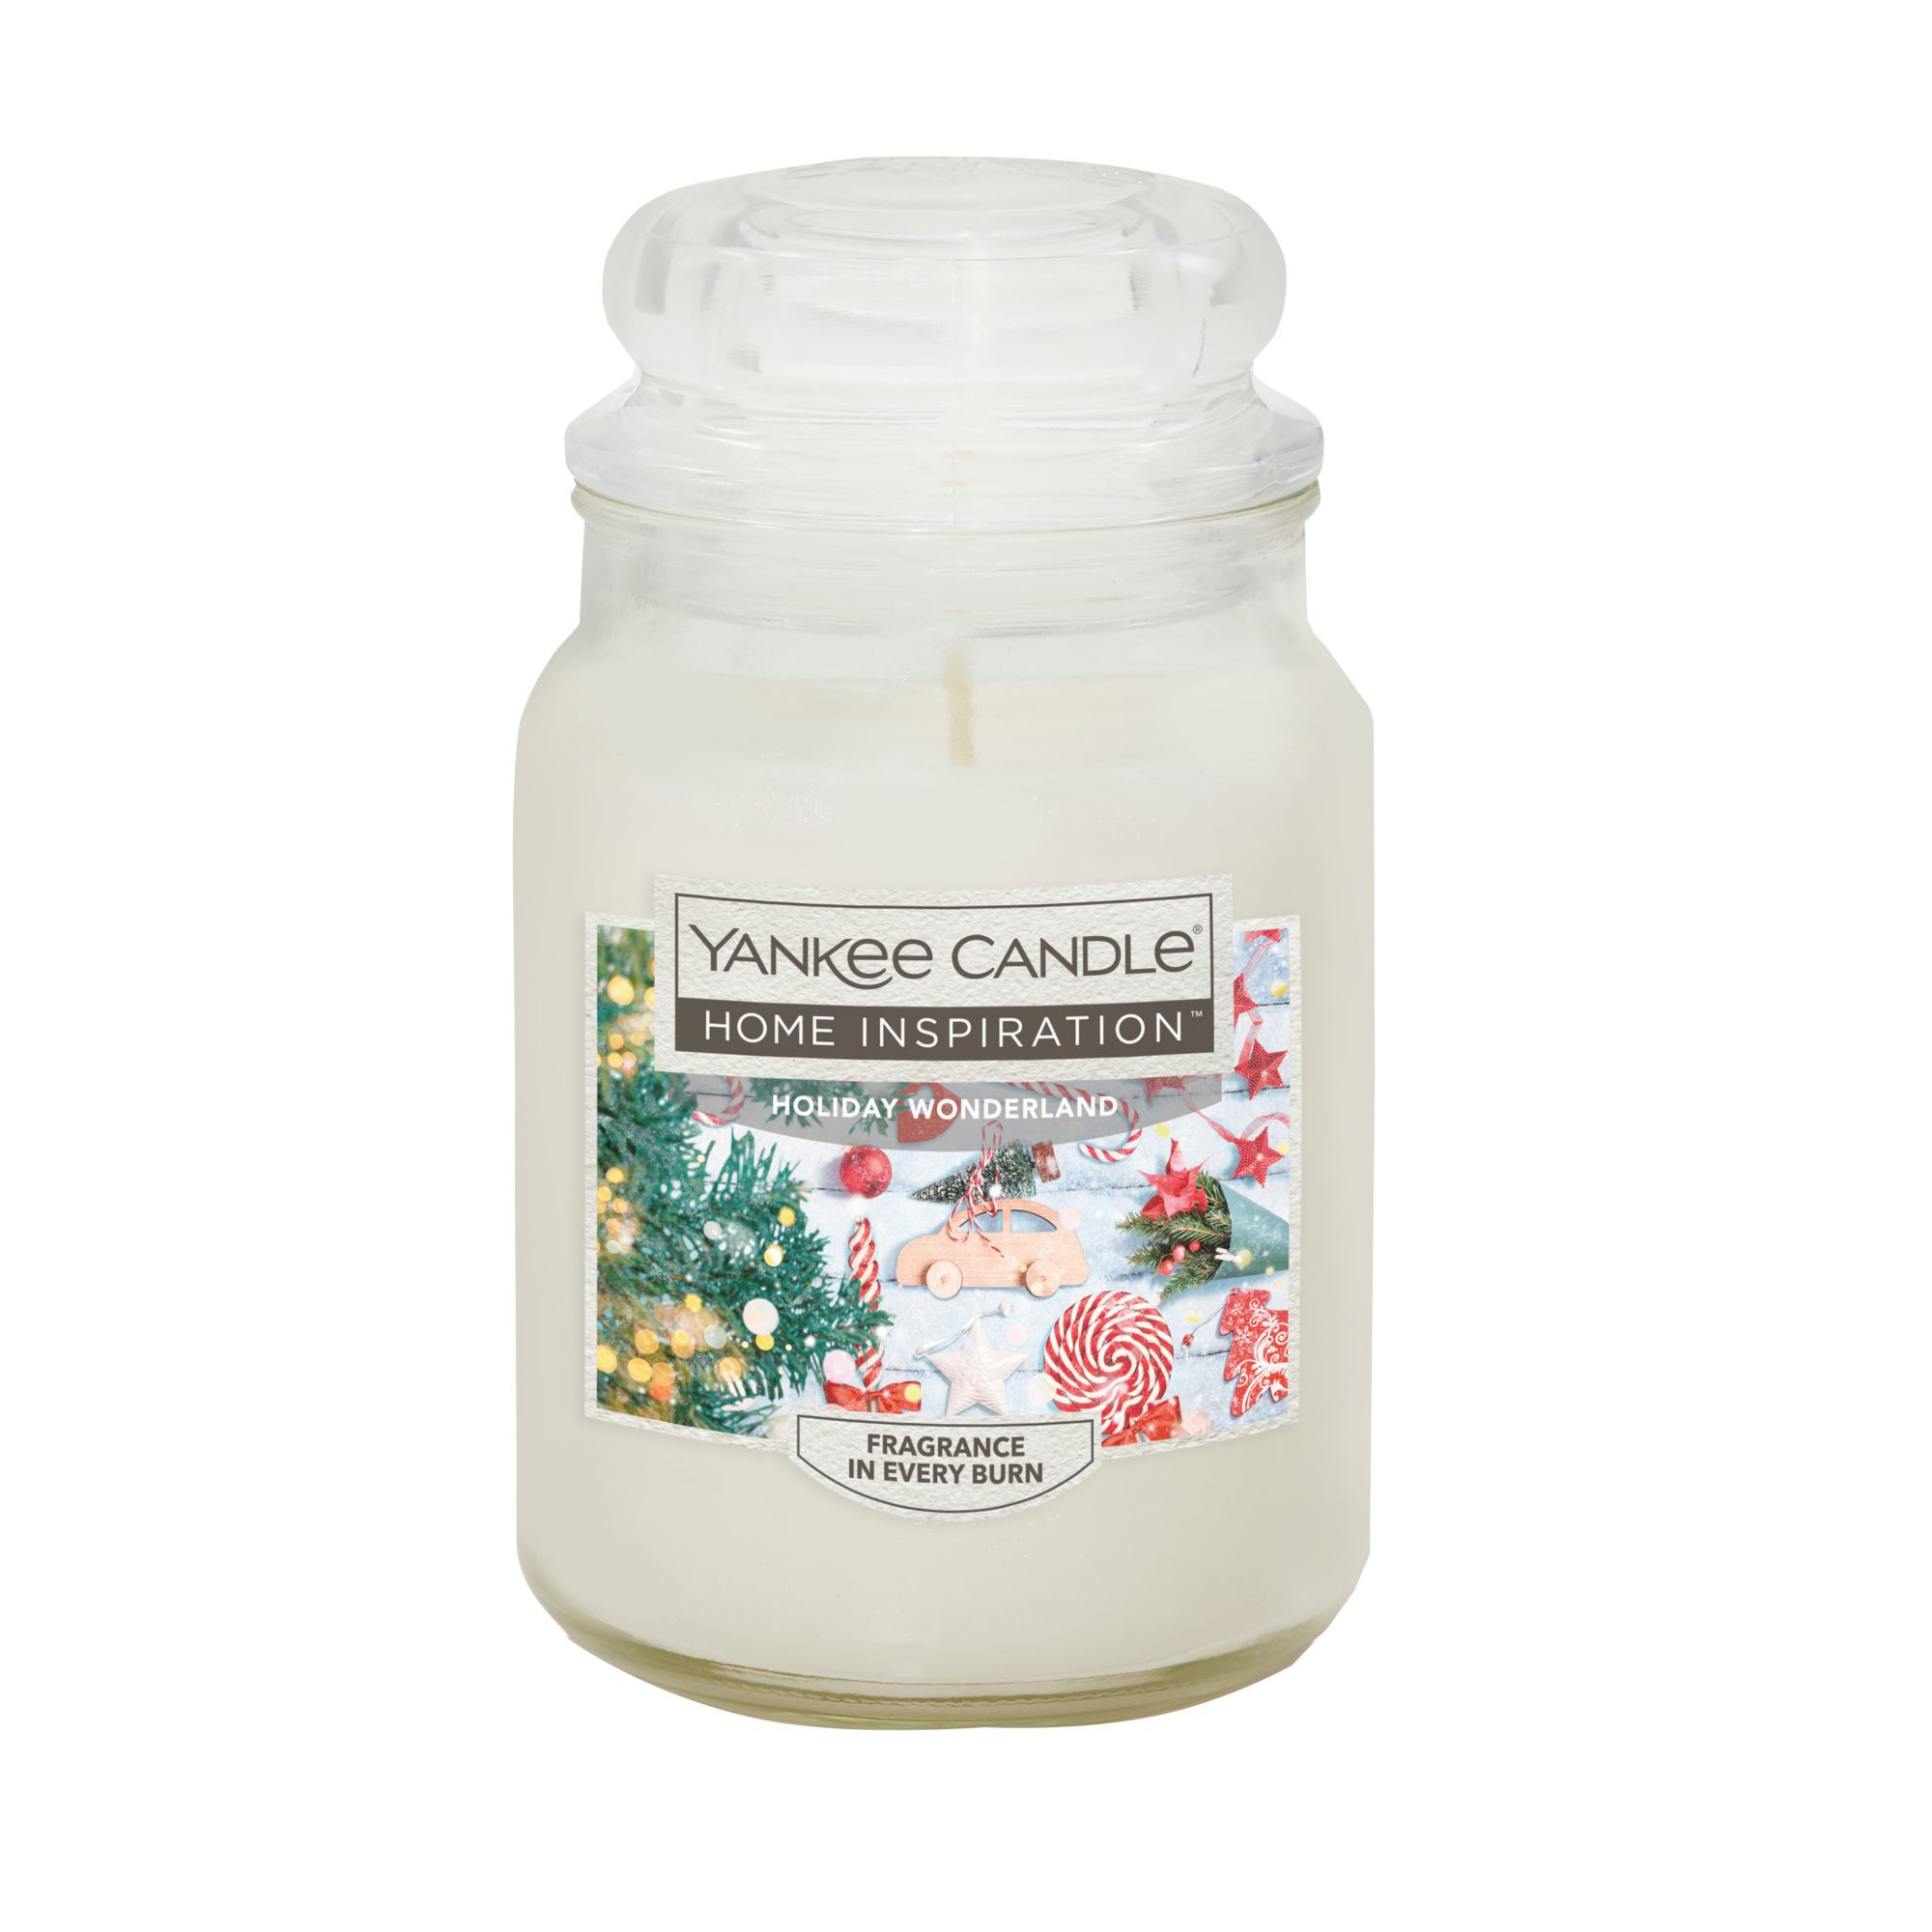 My First Yankee Candles - She Might Be Loved